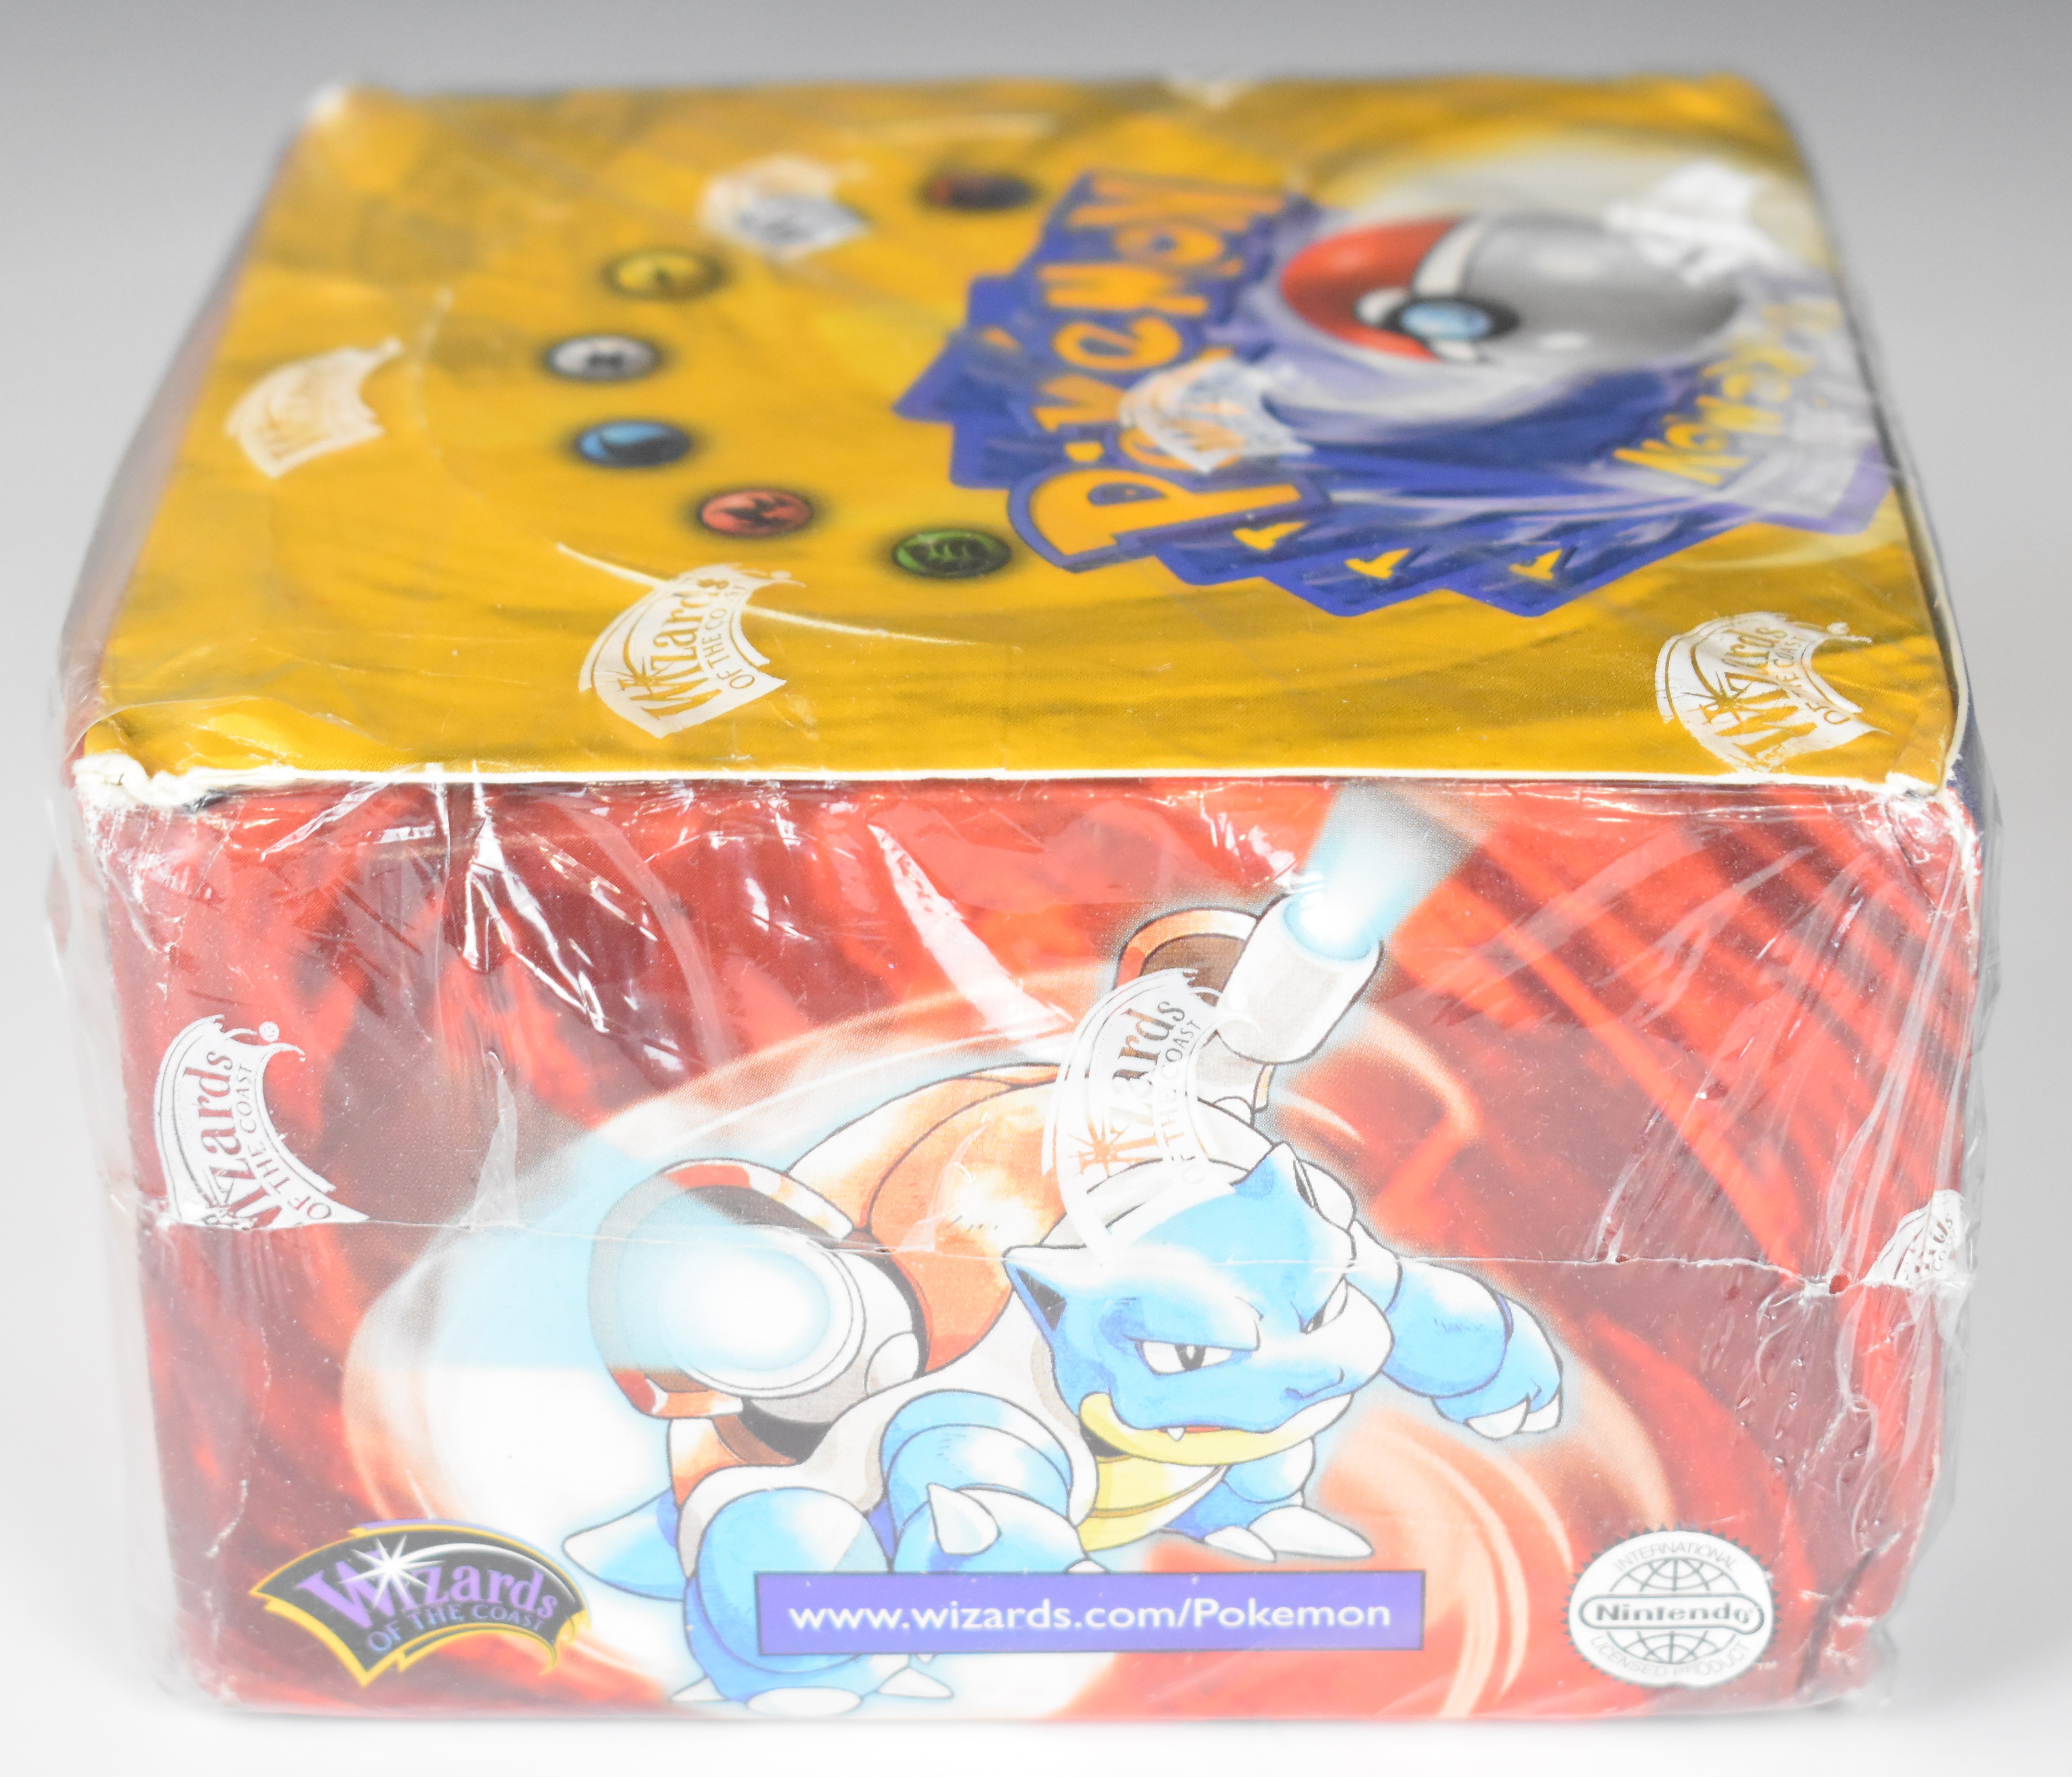 Pokémon TCG Base Set Booster Box, 4th edition by Wizards of the Coast (1999-2000), with made in UK - Image 6 of 9